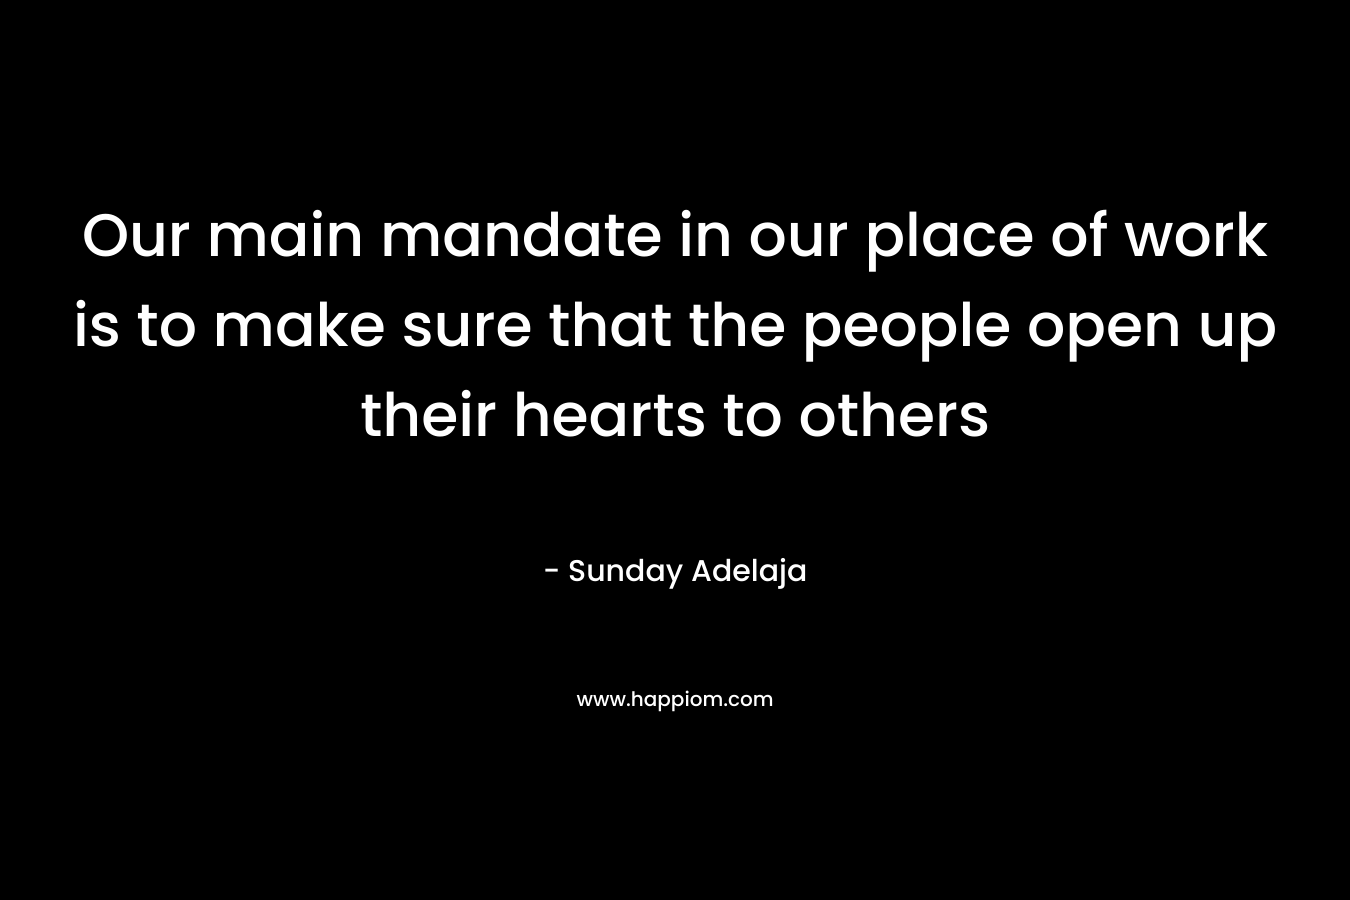 Our main mandate in our place of work is to make sure that the people open up their hearts to others